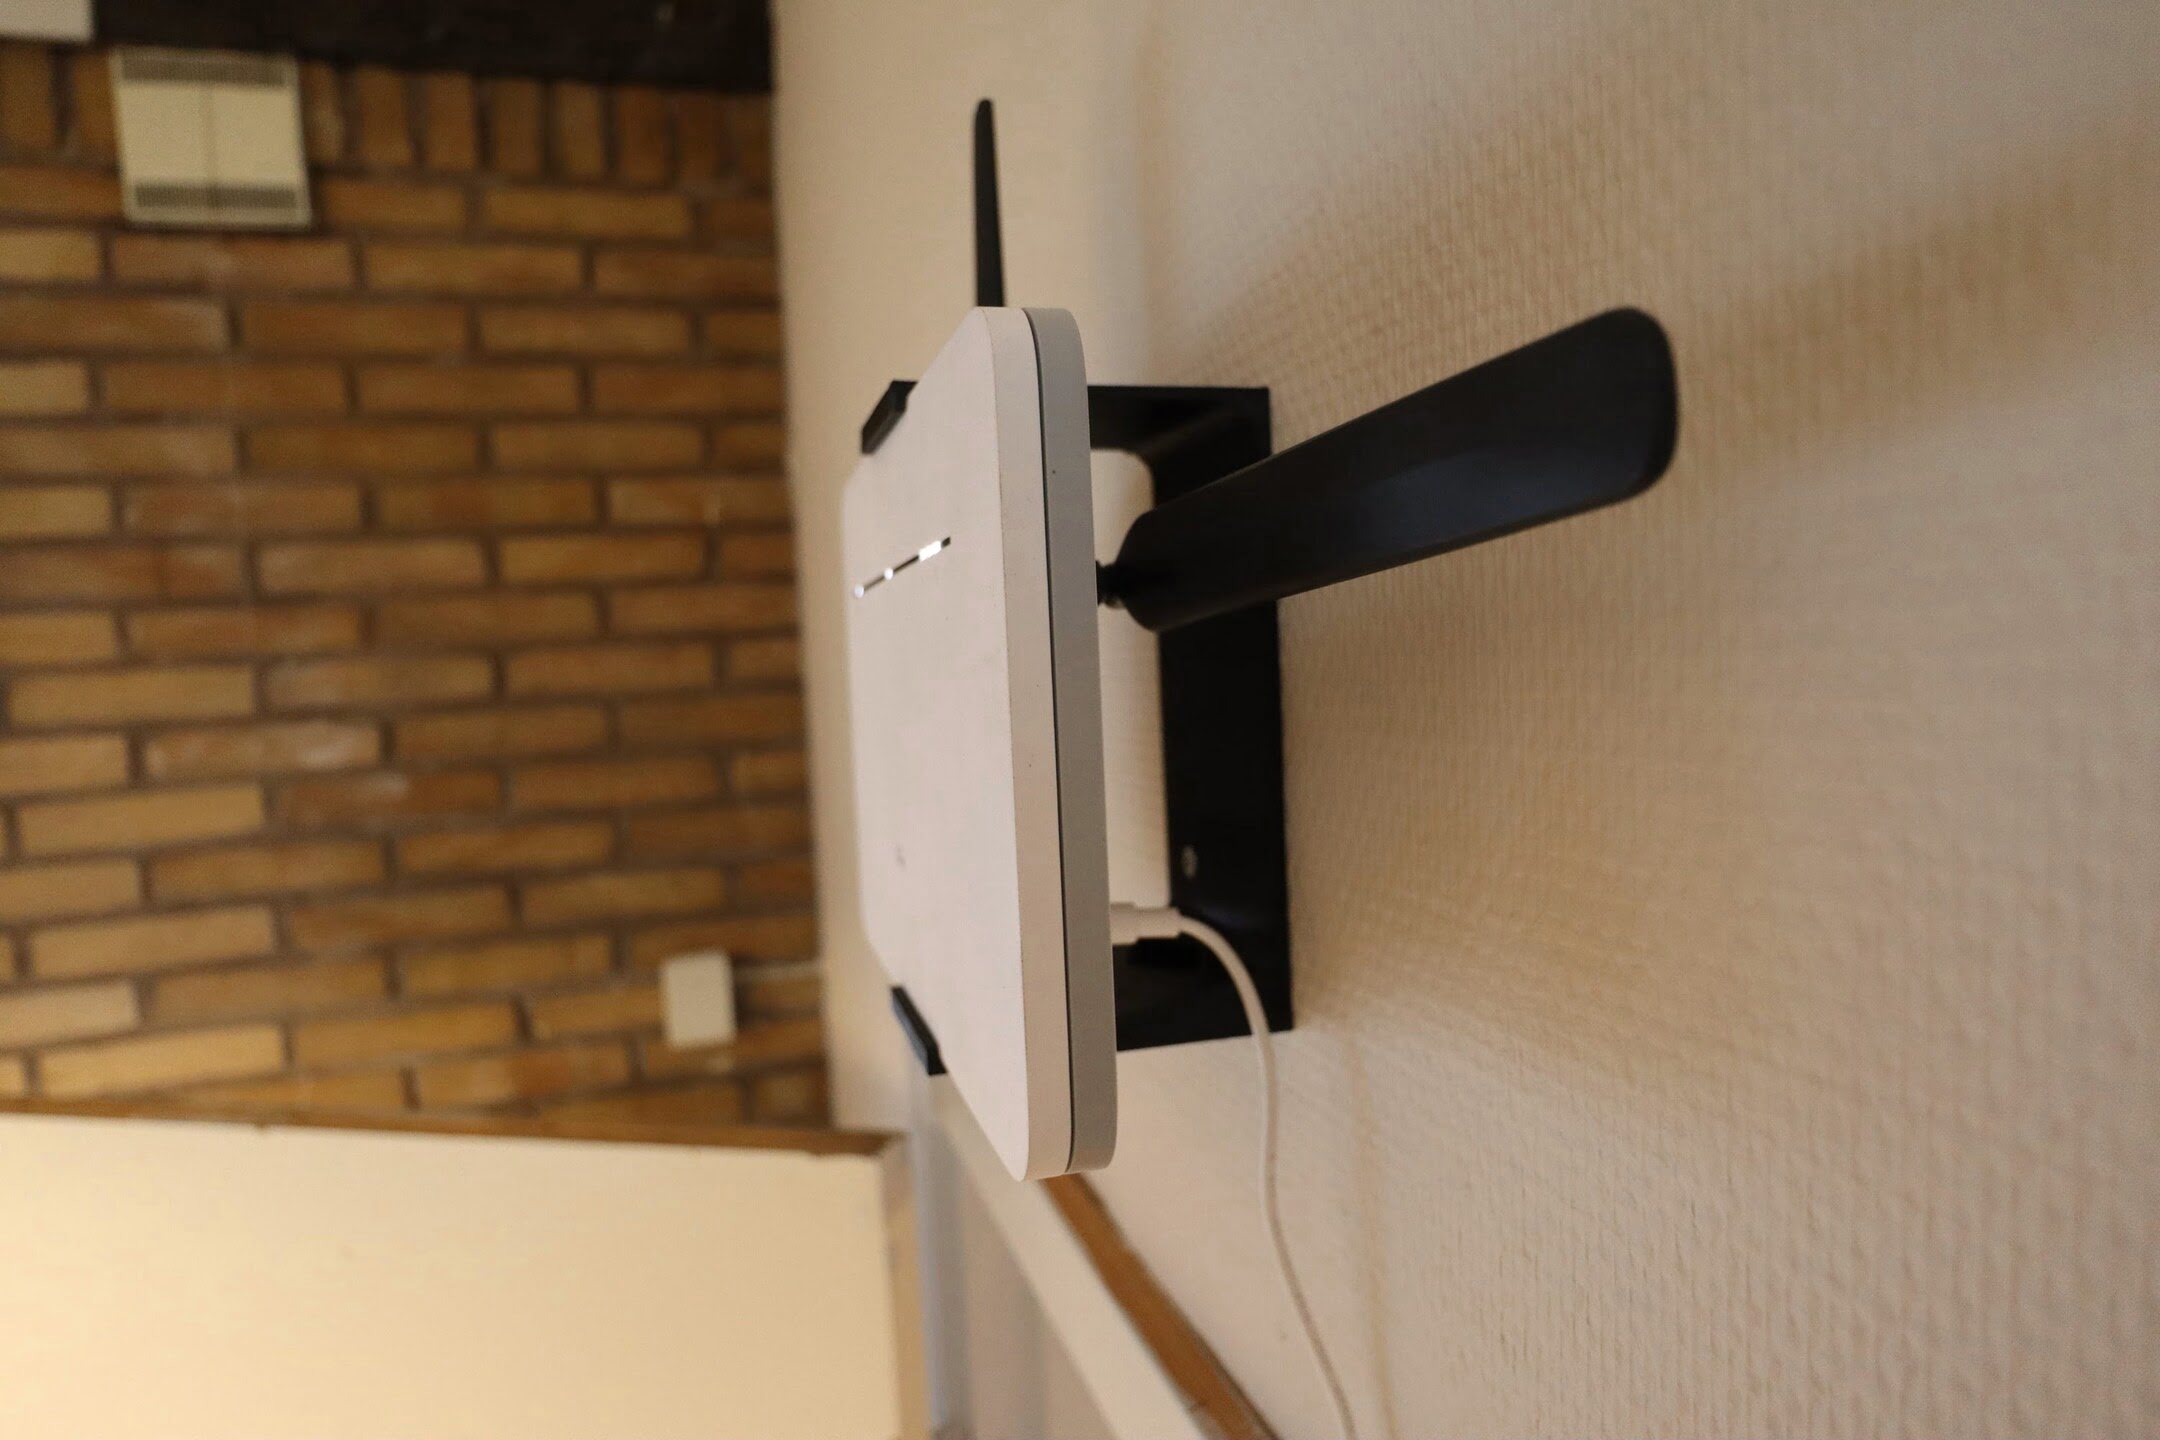 How To Mount A Wi-Fi Router On A Wall